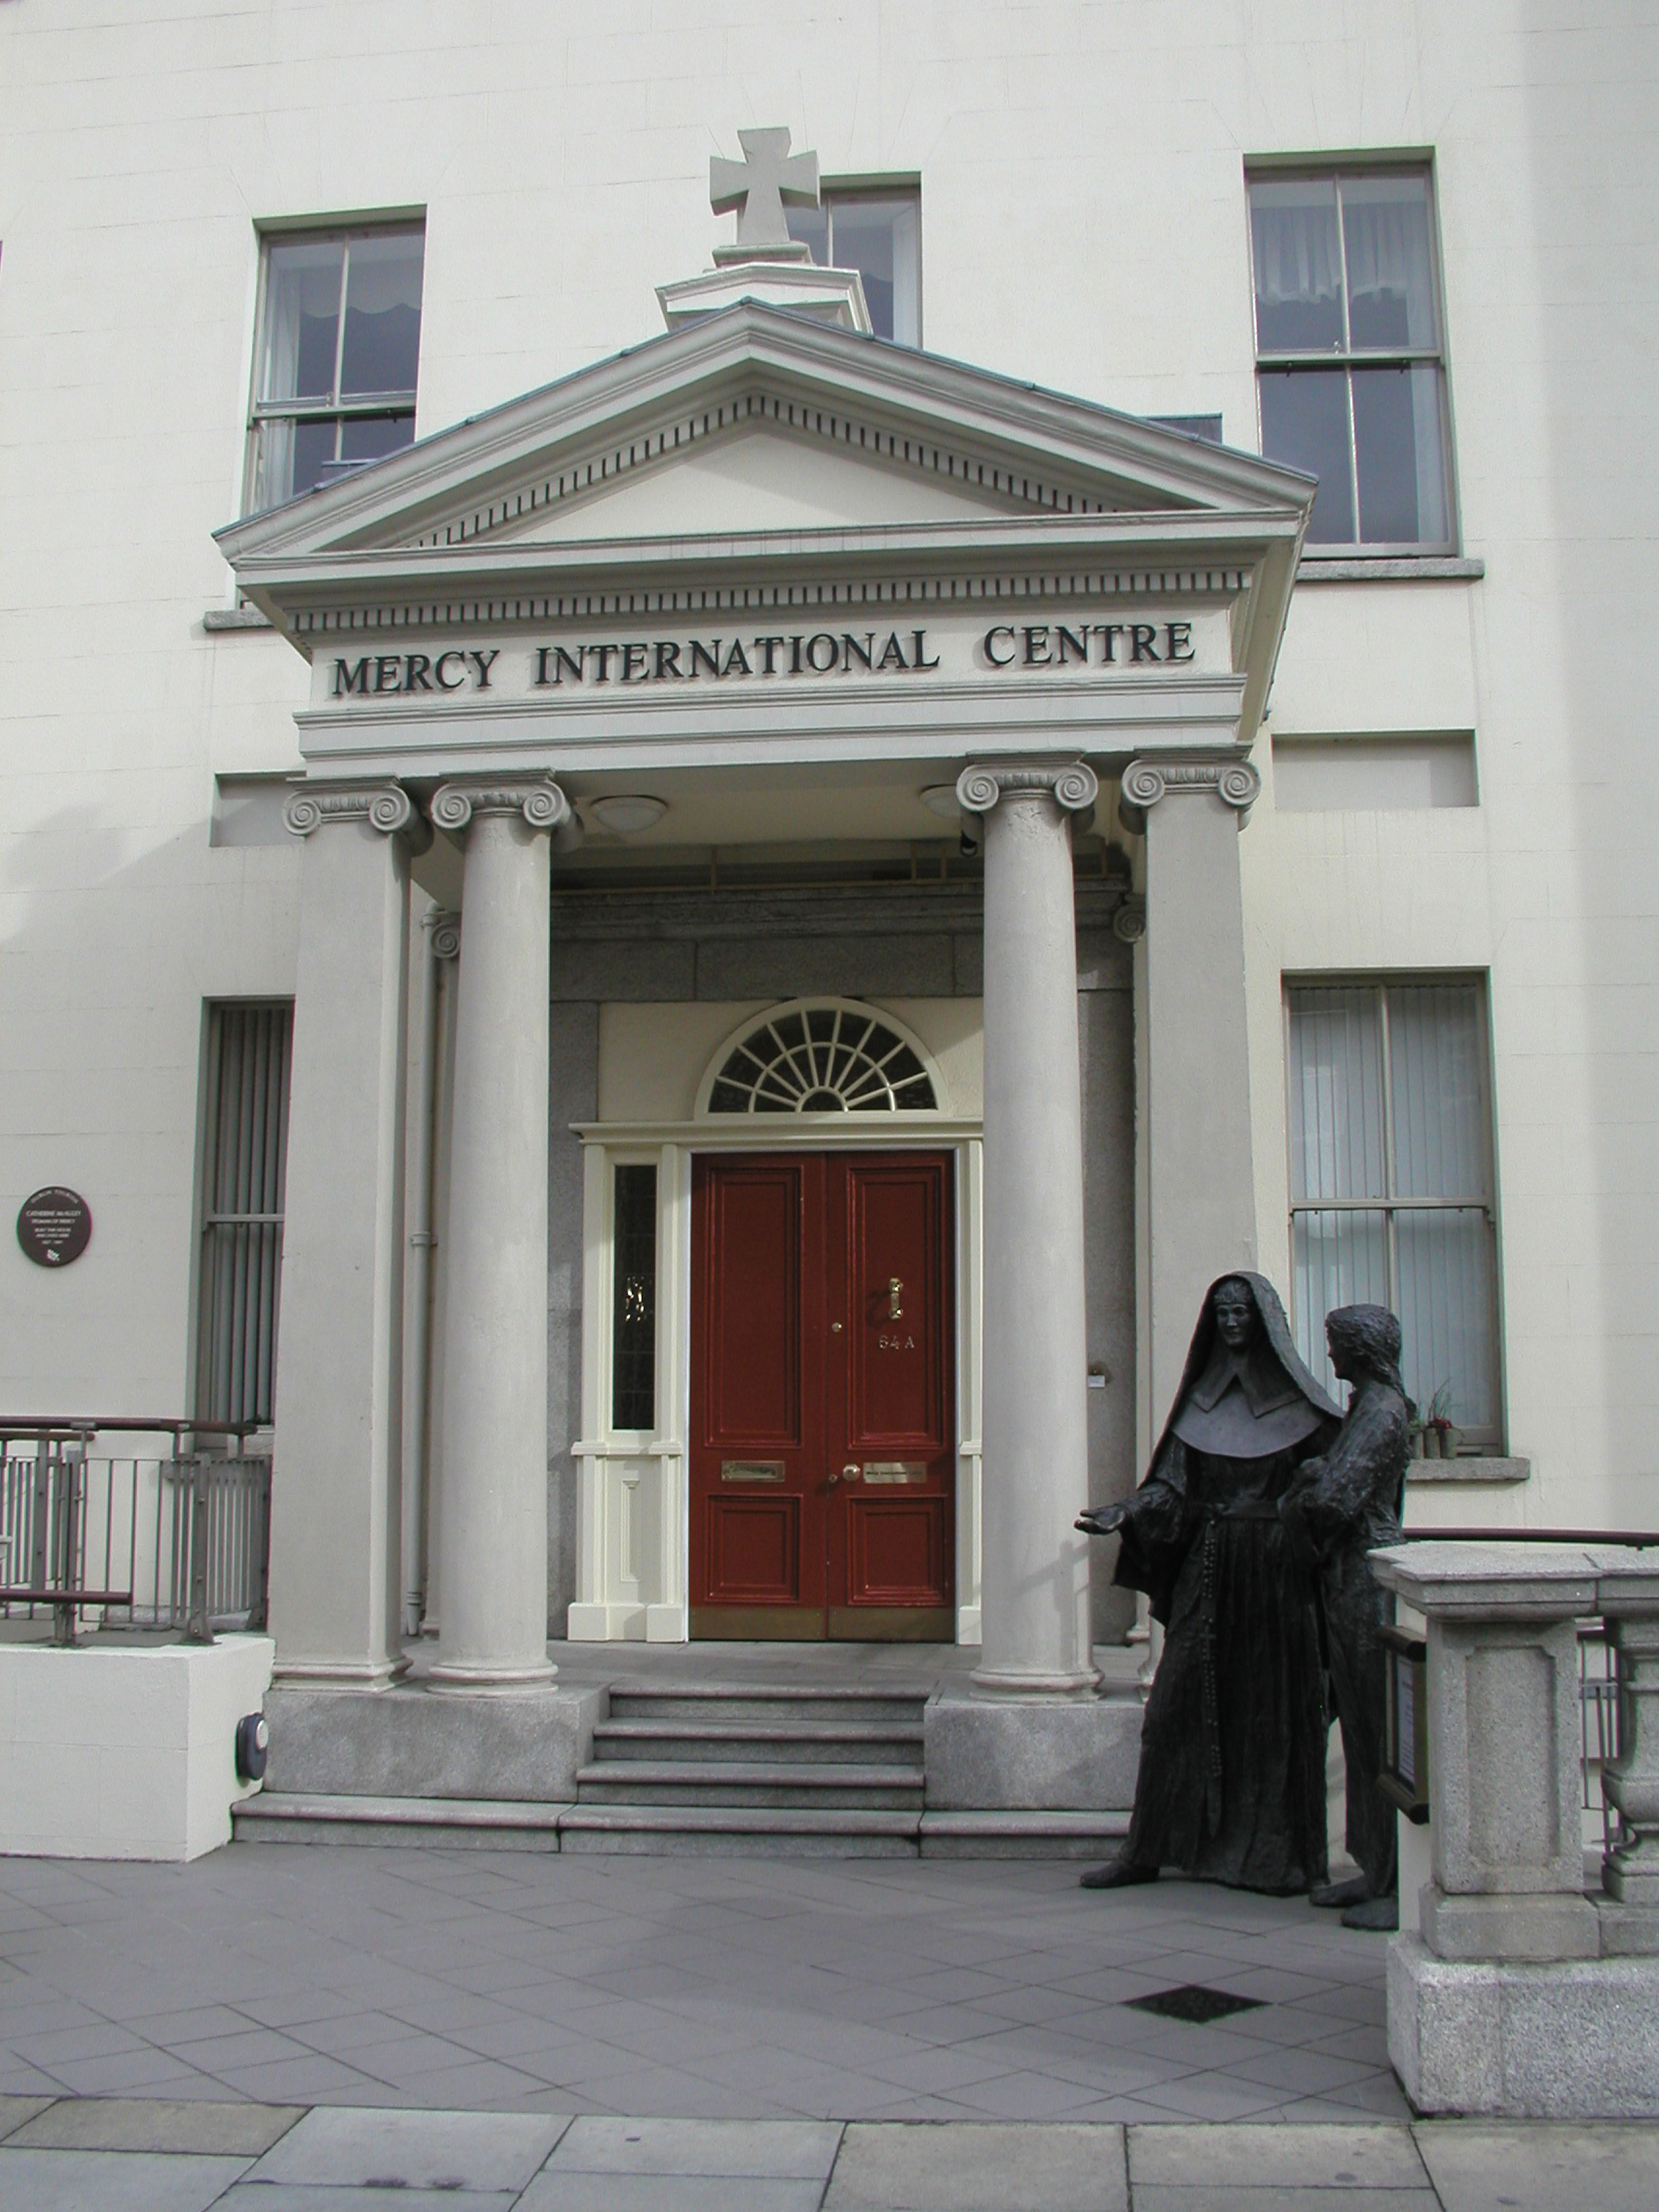 Entryway to the Mercy International Centre